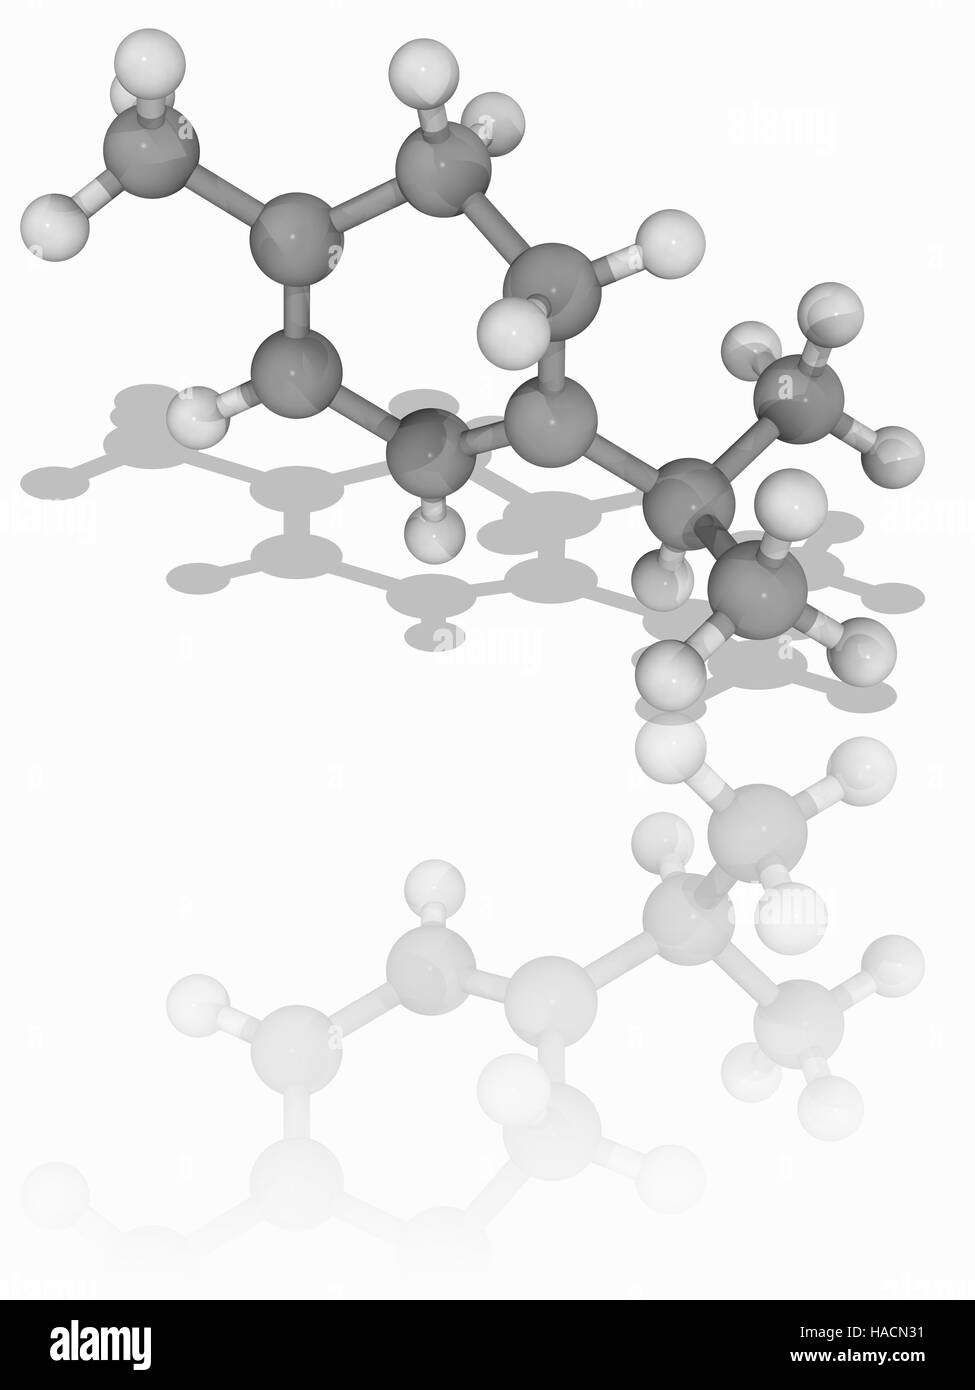 alpha-Terpinene. Molecular model of the cyclic monoterpene compound alpha-terpinene (C10.H16). This is classified as a hydrocarbon of a type known as a terpene. It is found in cardamom and marjoram oils. Atoms are represented as spheres and are colour-coded: carbon (grey) and hydrogen (white). Illustration. Stock Photo